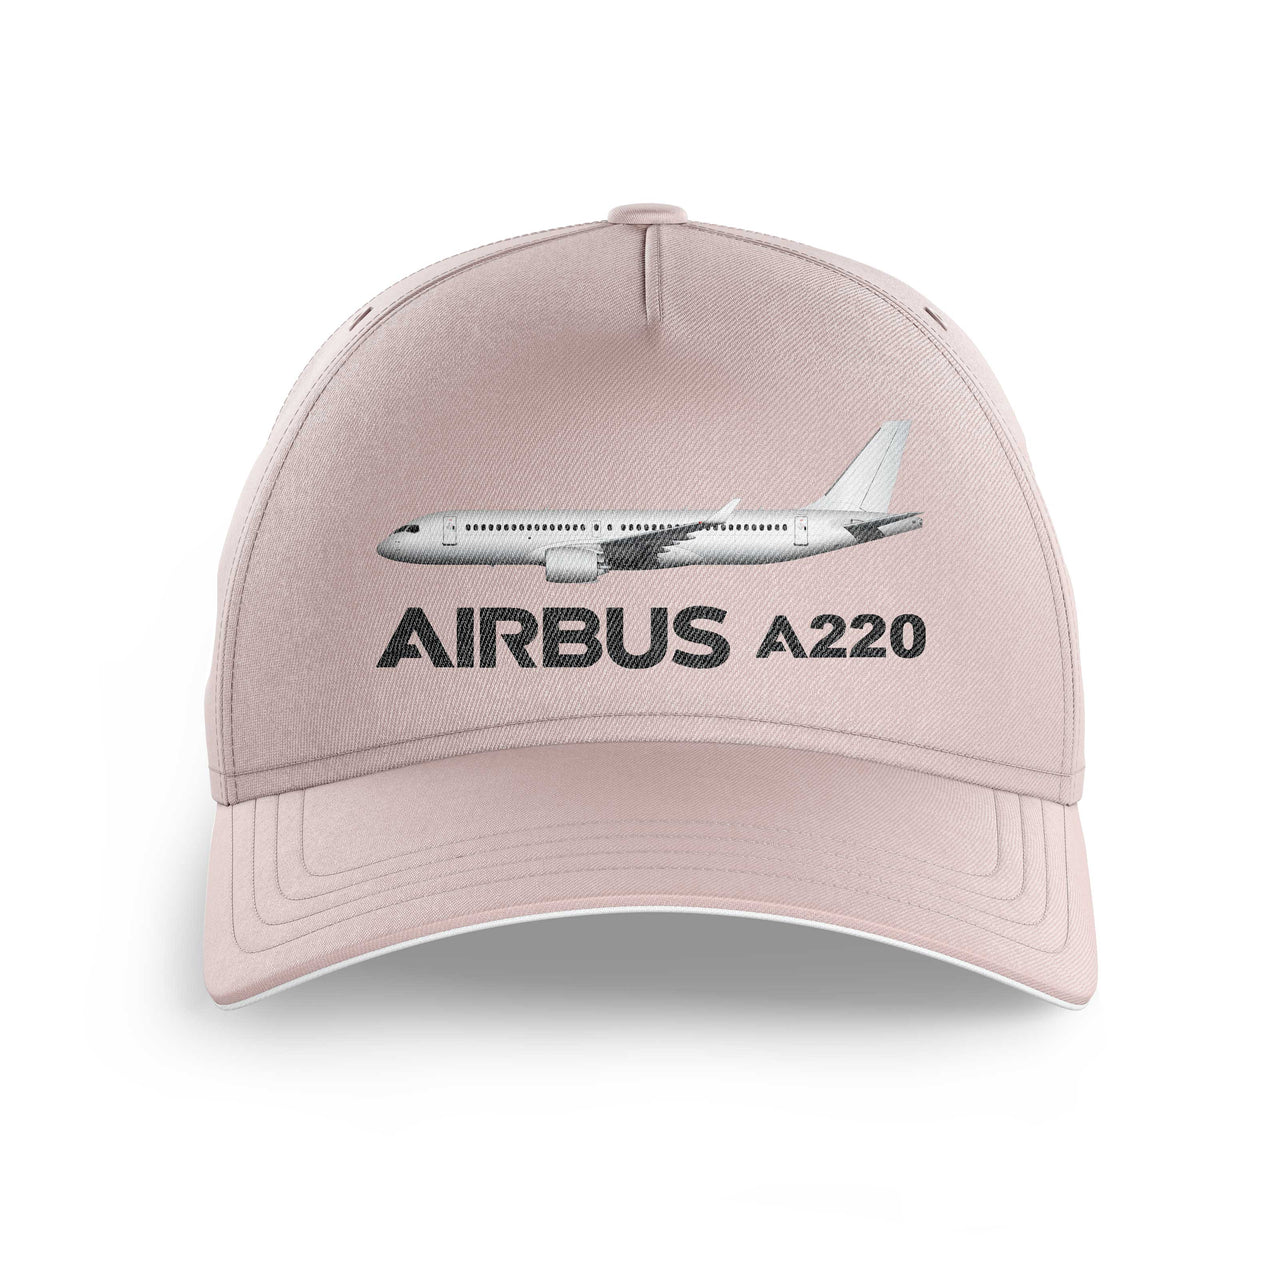 The Airbus A220 Printed Hats